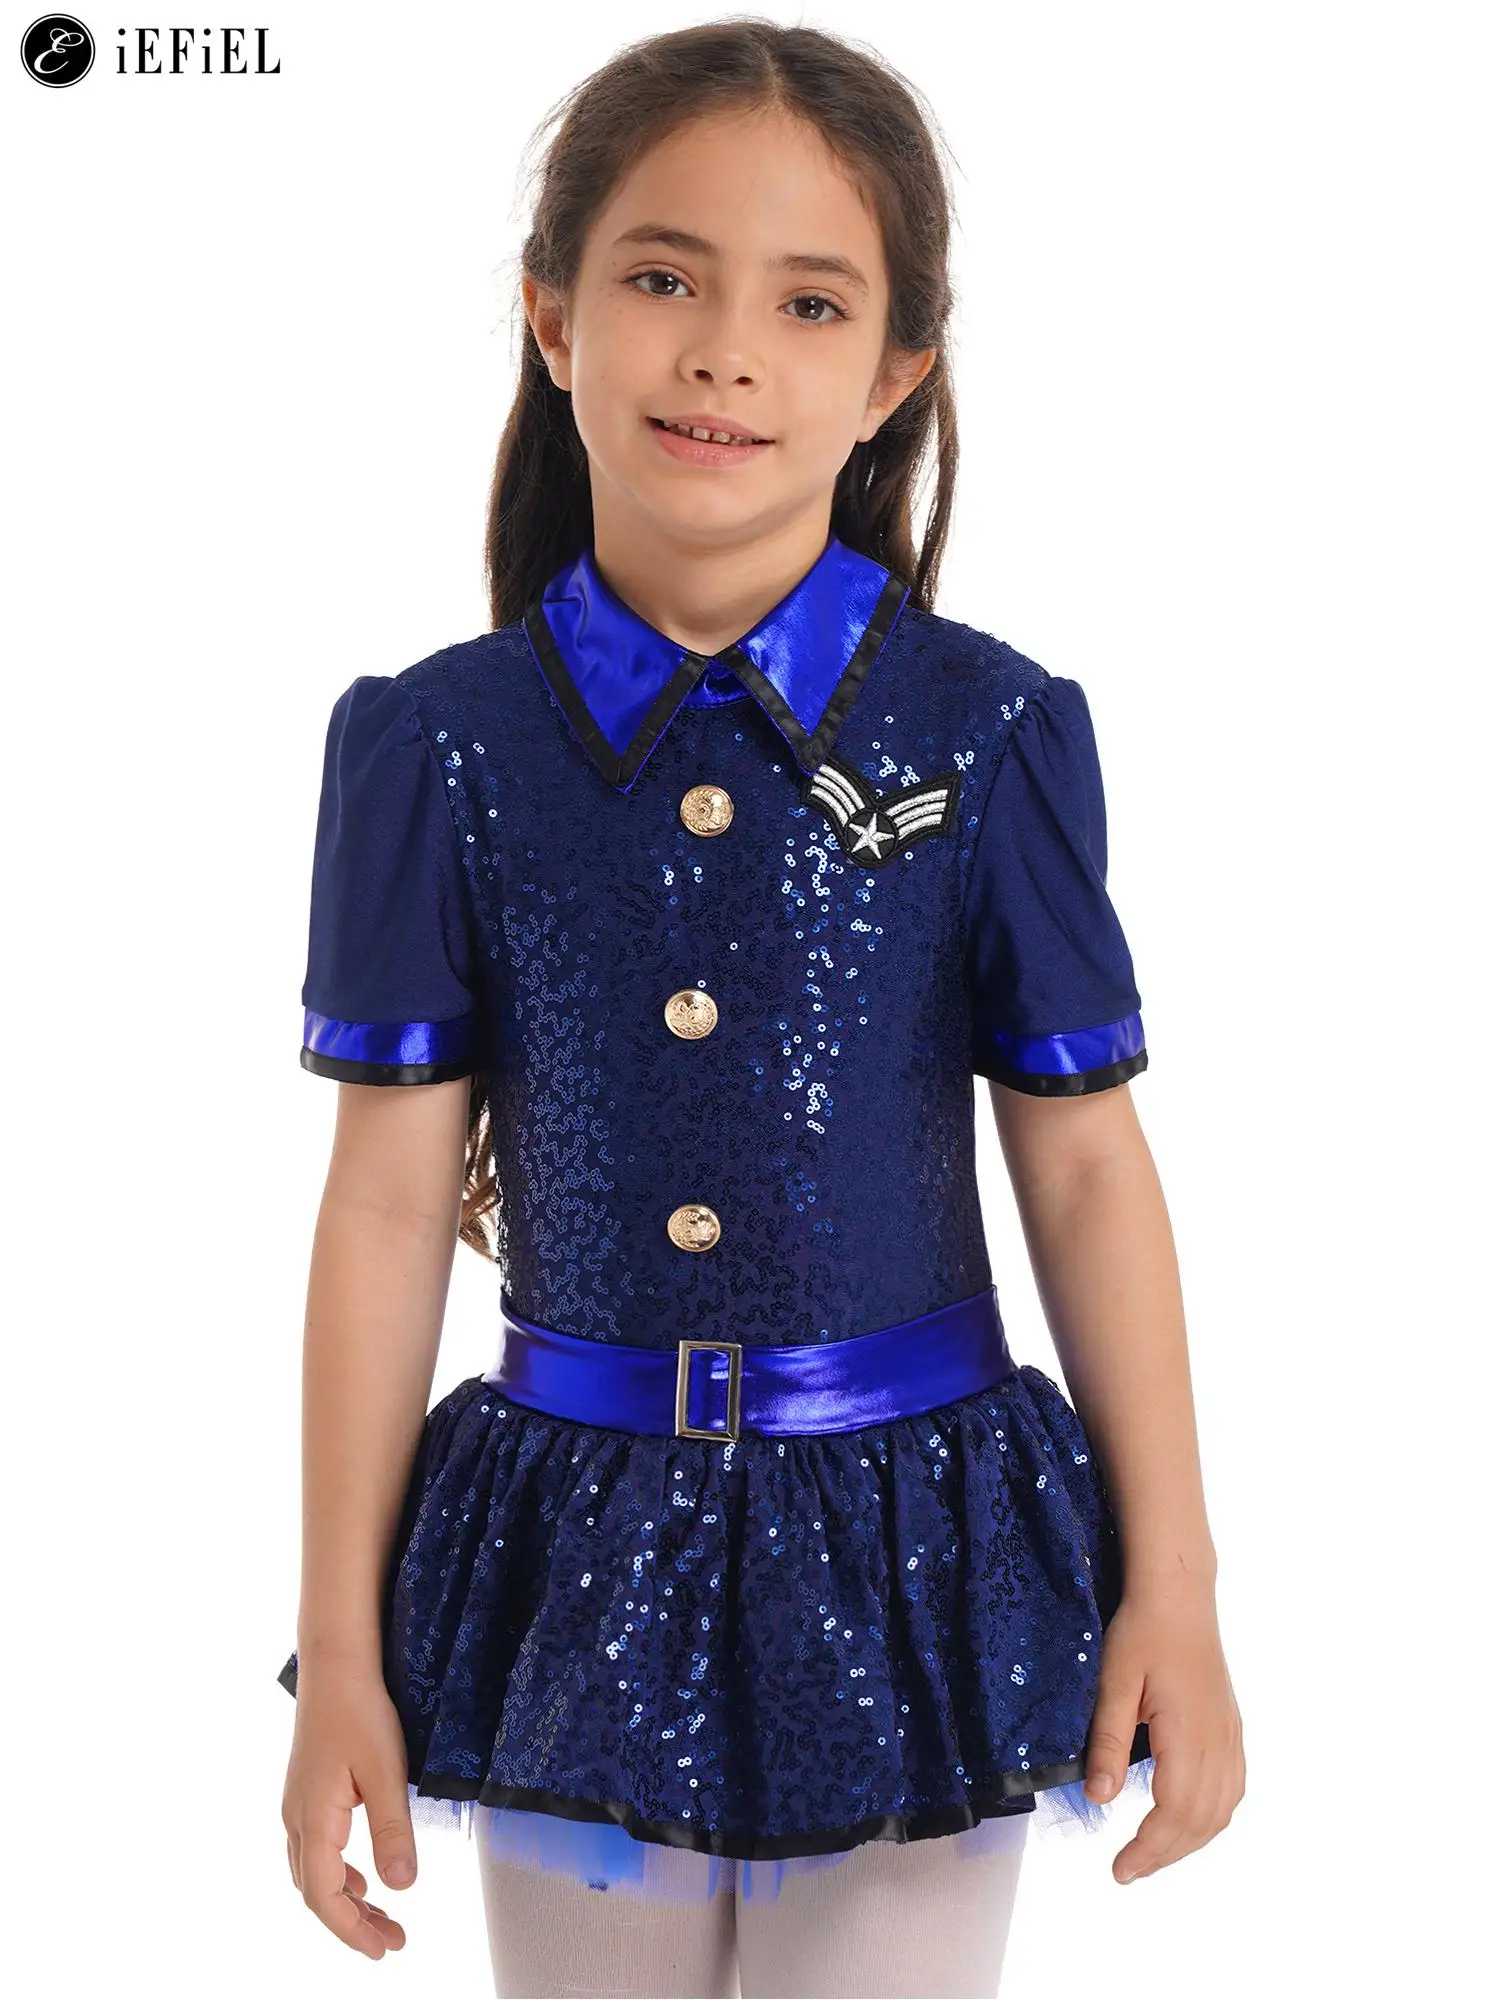 Kids Girls Shiny Sequins Police Officer Costume Policewoman Halloween Party Carnival Cop Pretend Play Fancy Dress Up